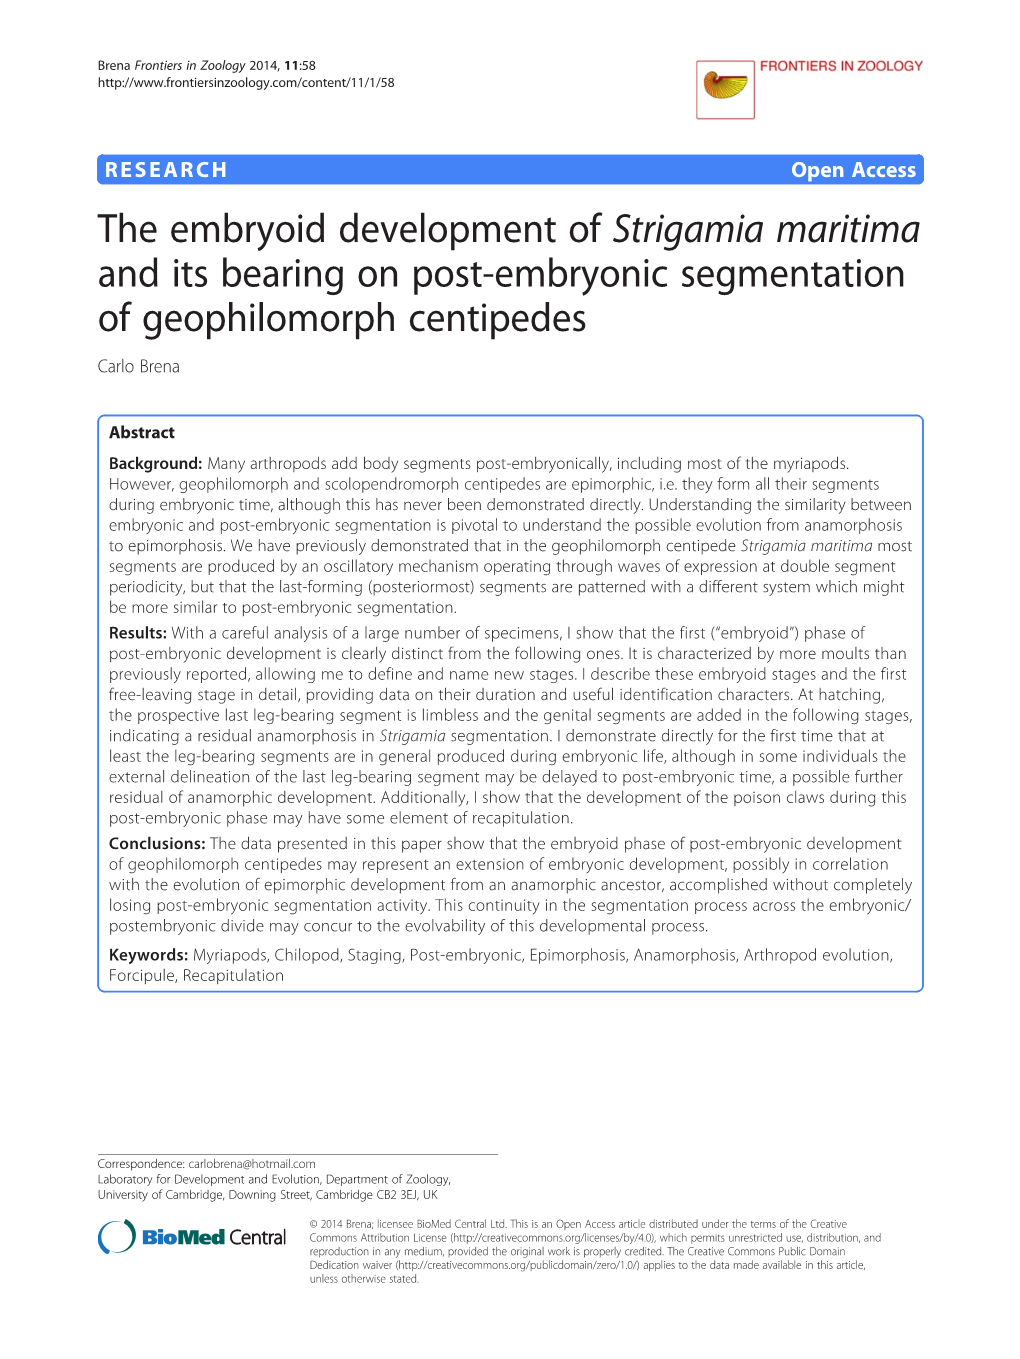 The Embryoid Development of Strigamia Maritima and Its Bearing on Post-Embryonic Segmentation of Geophilomorph Centipedes Carlo Brena